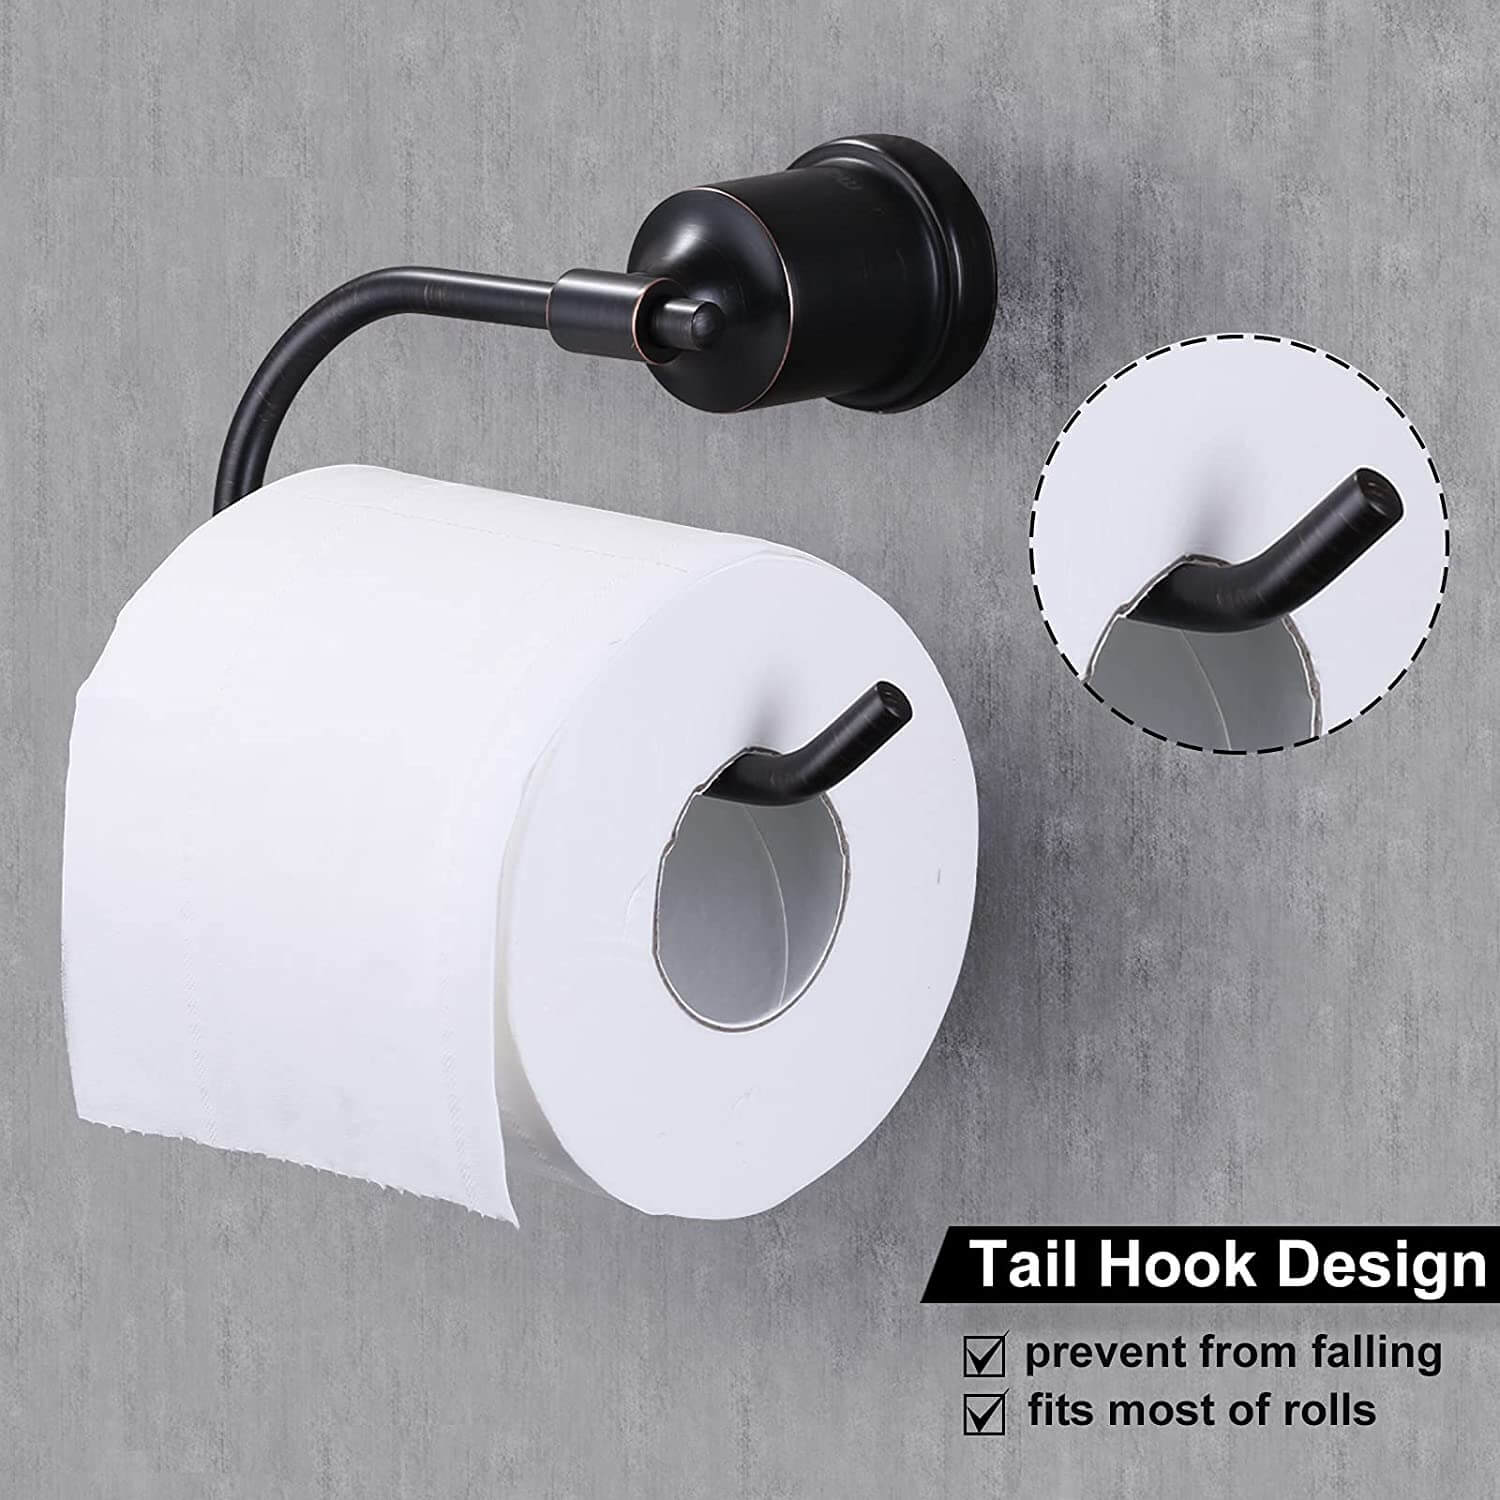 wowow oil rubbed bronze toilet paper holder wall mount bathroom toilet roll holder